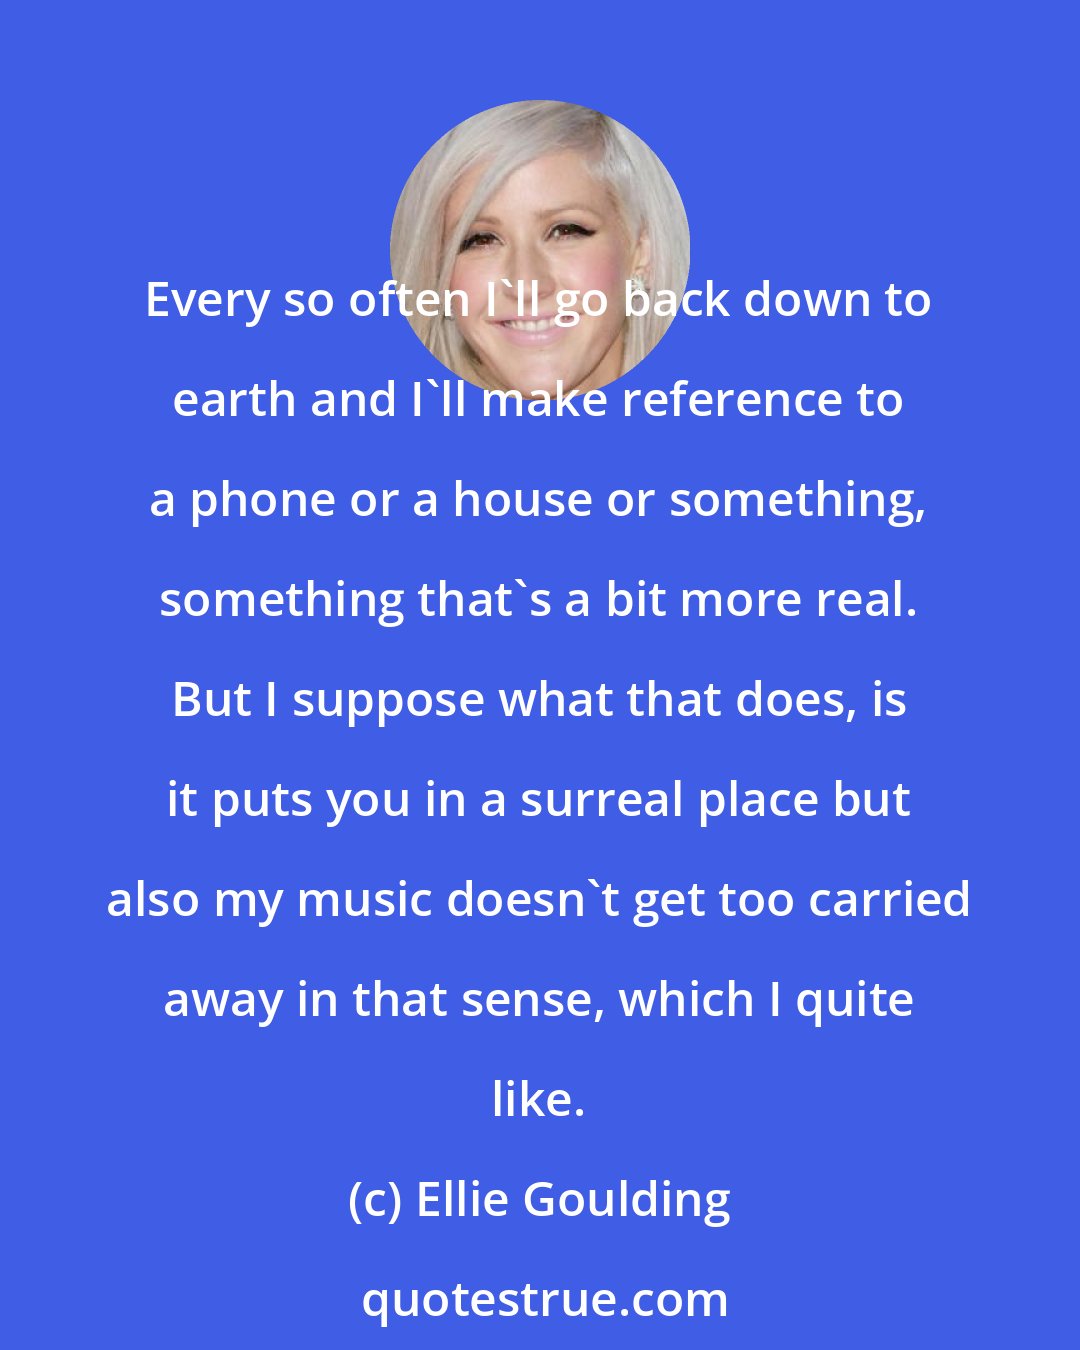 Ellie Goulding: Every so often I'll go back down to earth and I'll make reference to a phone or a house or something, something that's a bit more real. But I suppose what that does, is it puts you in a surreal place but also my music doesn't get too carried away in that sense, which I quite like.